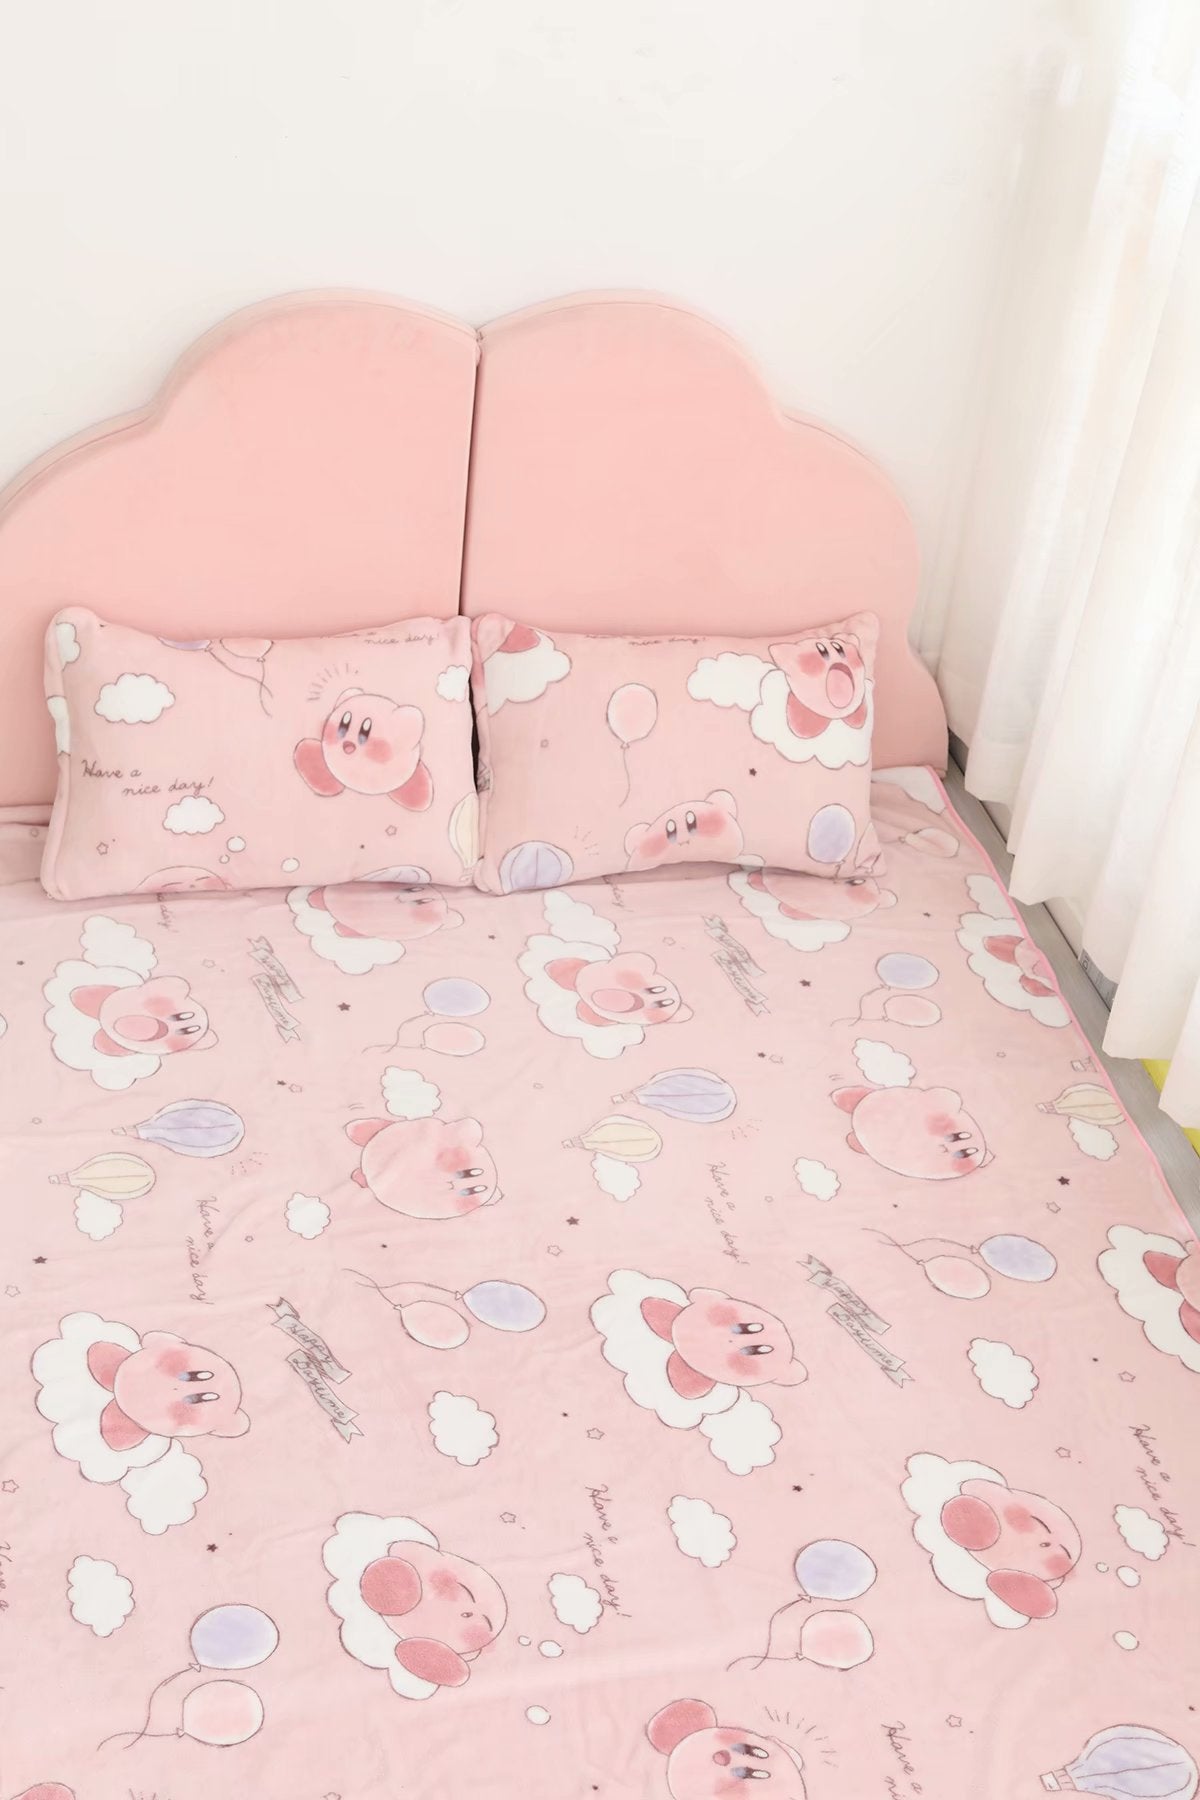 FLCL Anime Pattern Blankets | LookHUMAN